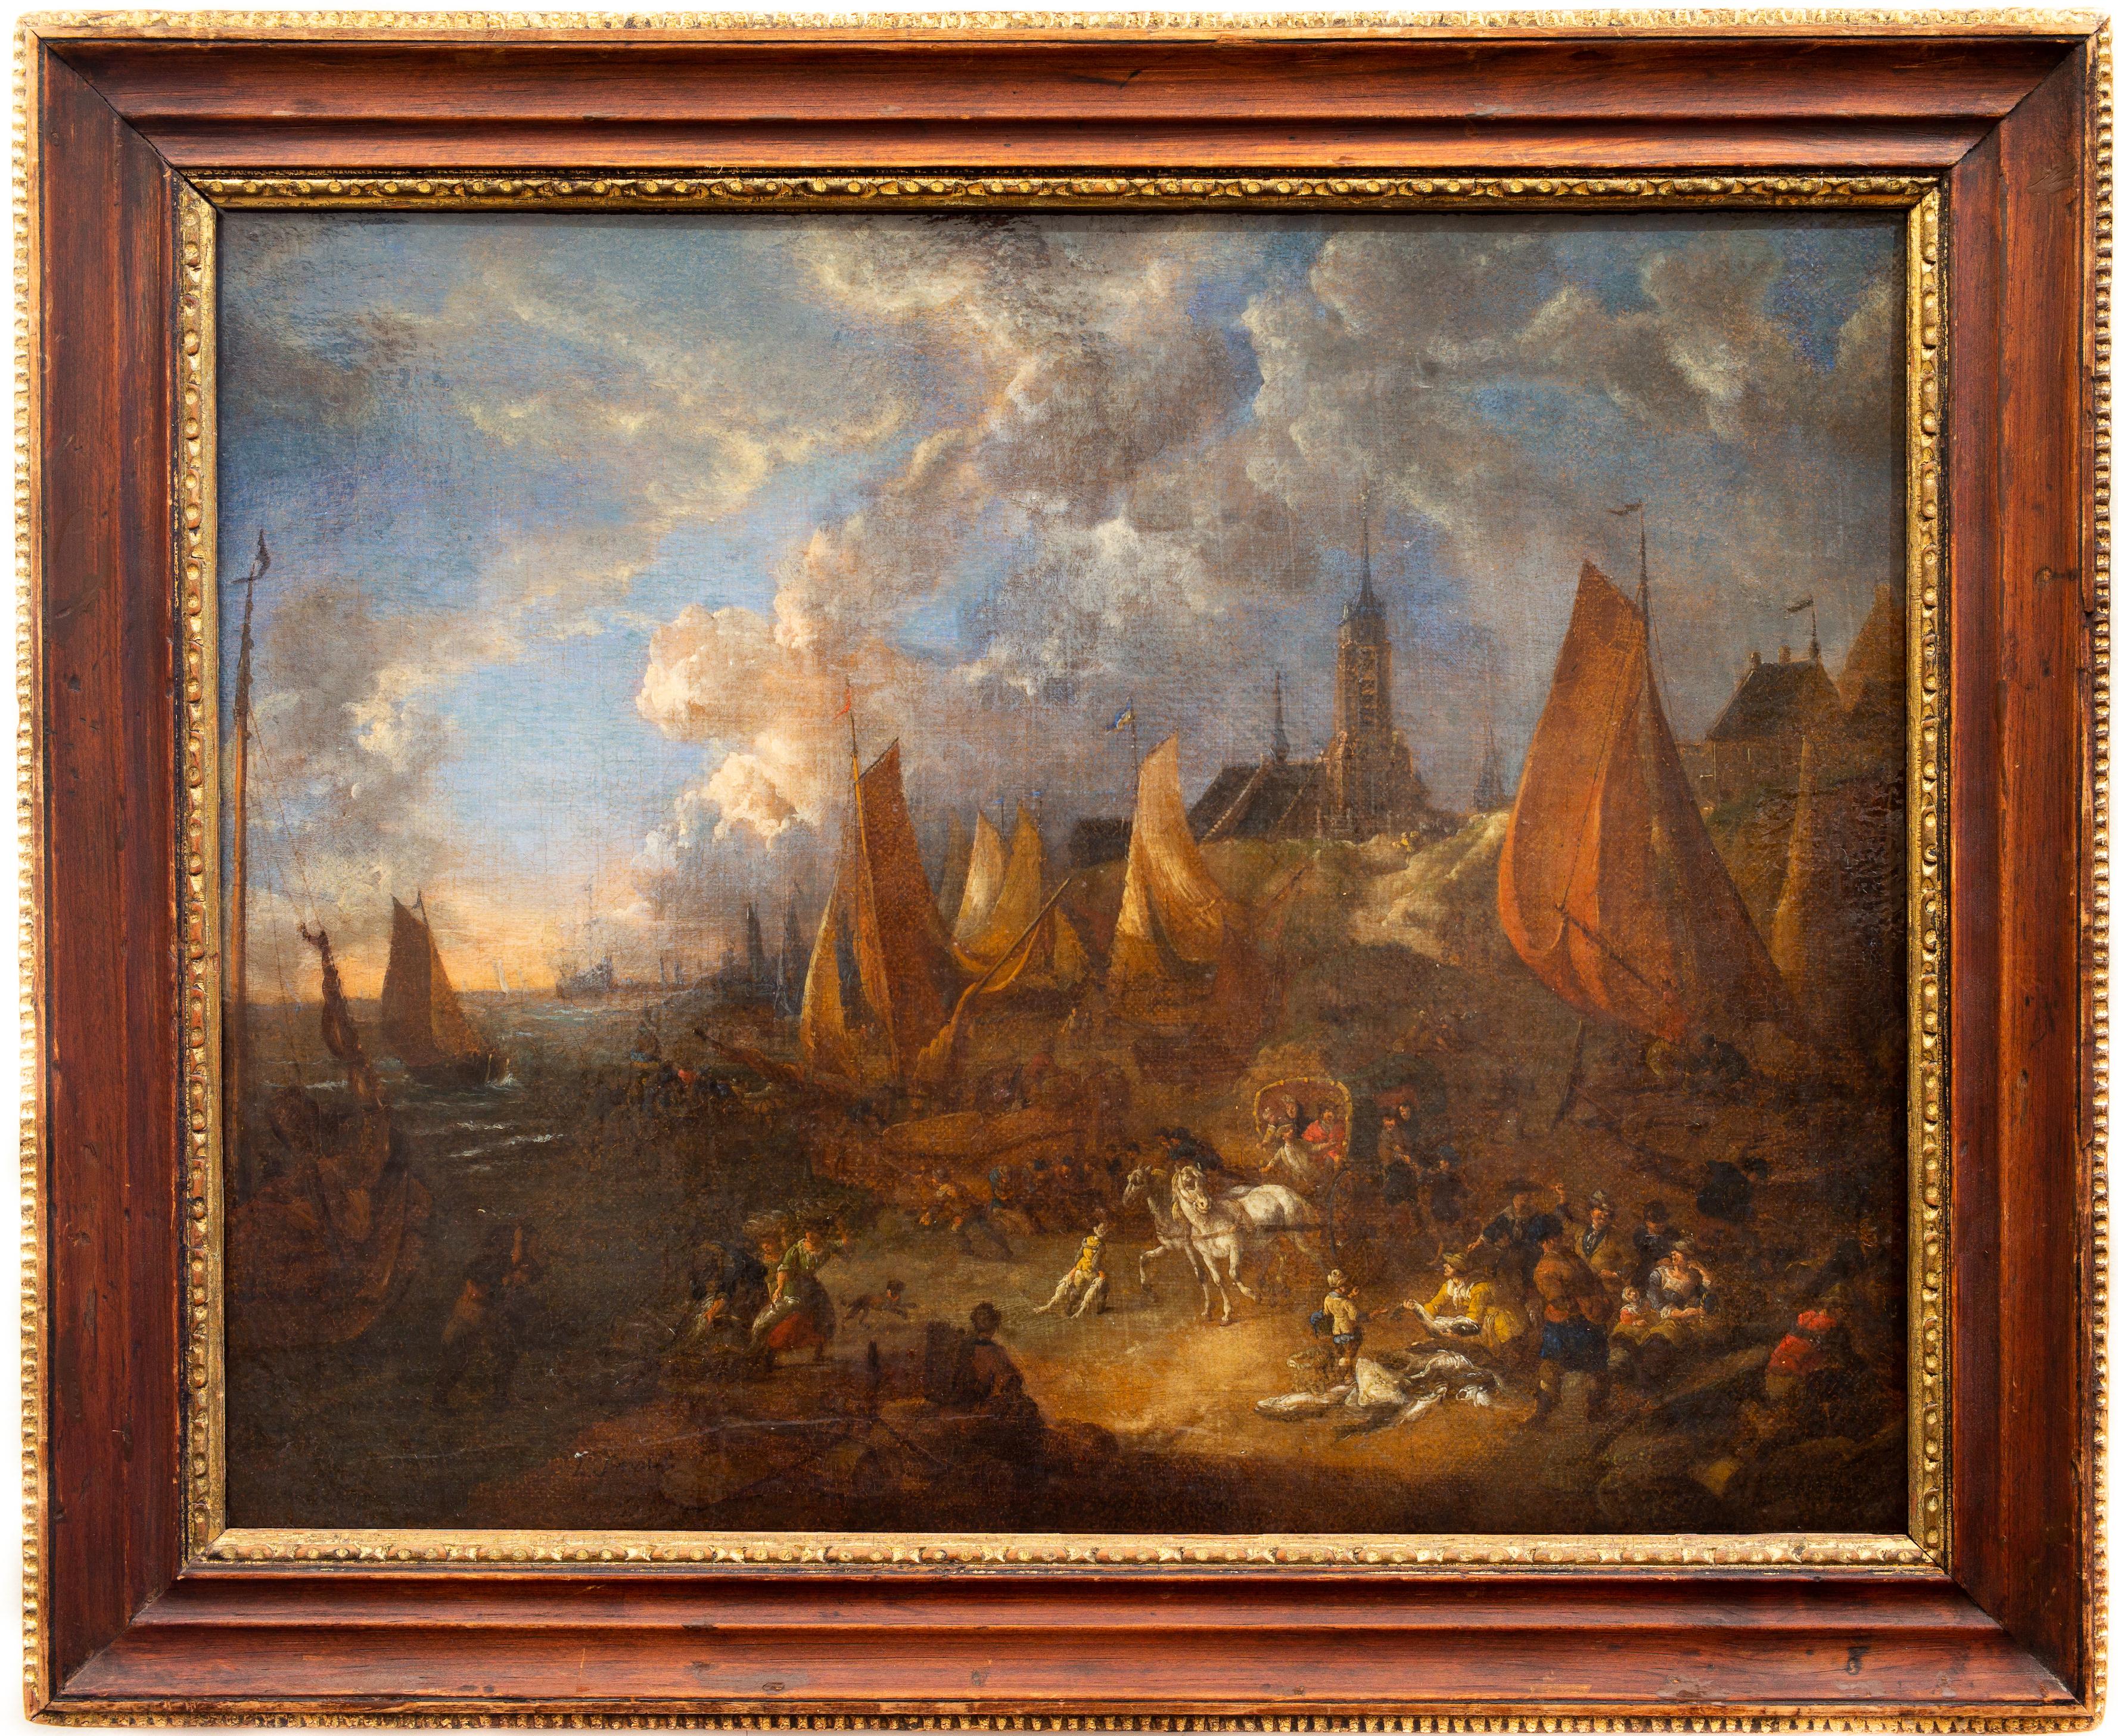 Lucas Smout II Figurative Painting - 17th-cent, A Coastal Landscape With Travellers and Fishermen Selling Their Catch